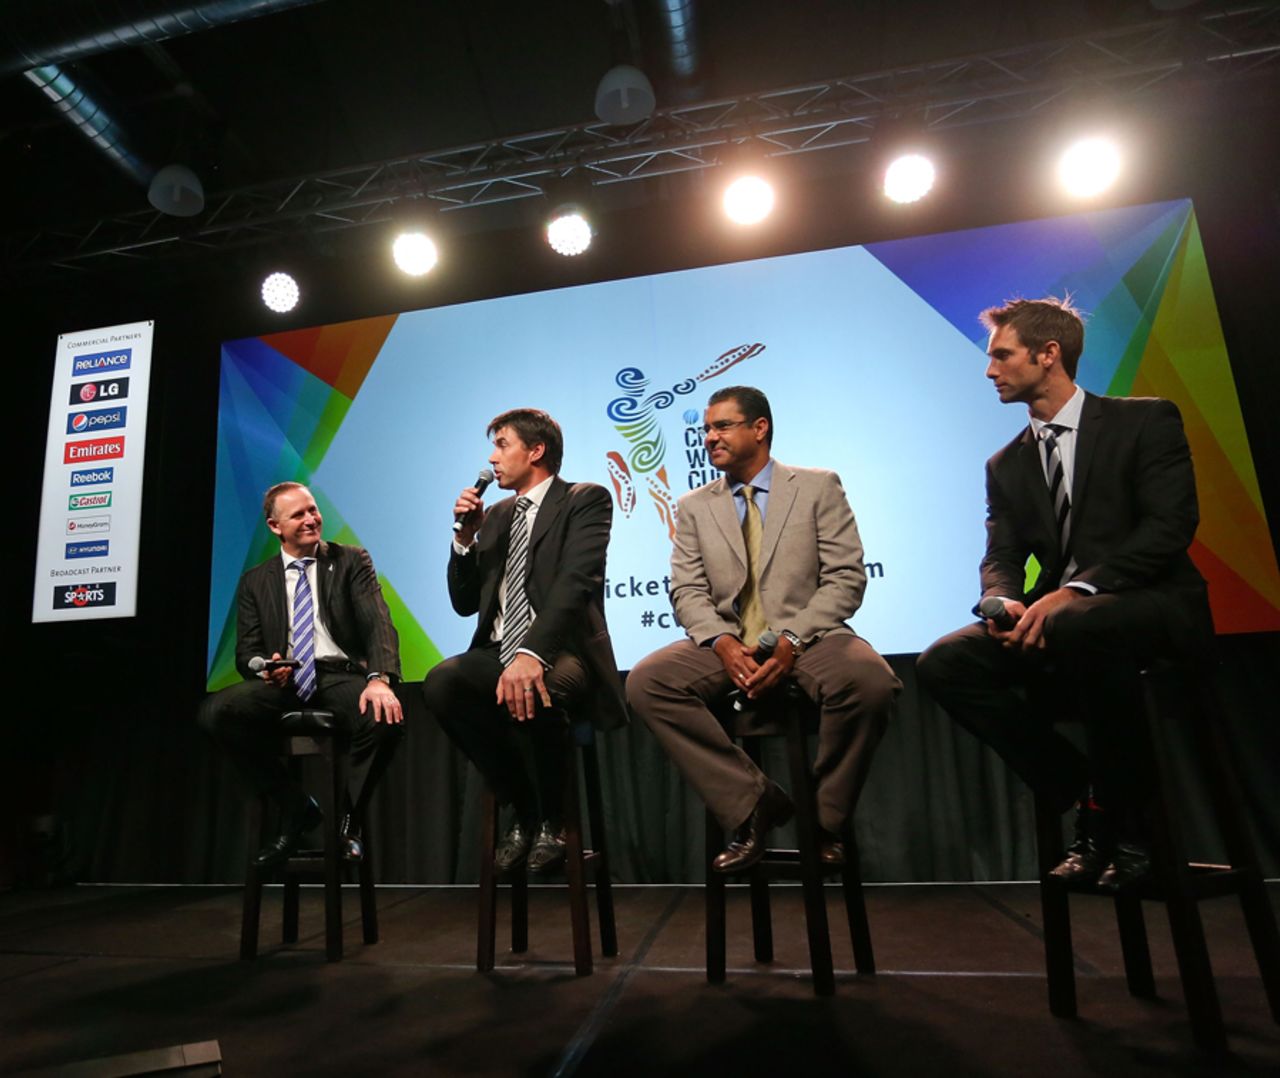 New Zealand PM John Key, Stephen Fleming, Waqar Younis and Grant Elliott chat at the unveiling of the 2015 World Cup groups, Wellington, July 30, 2013